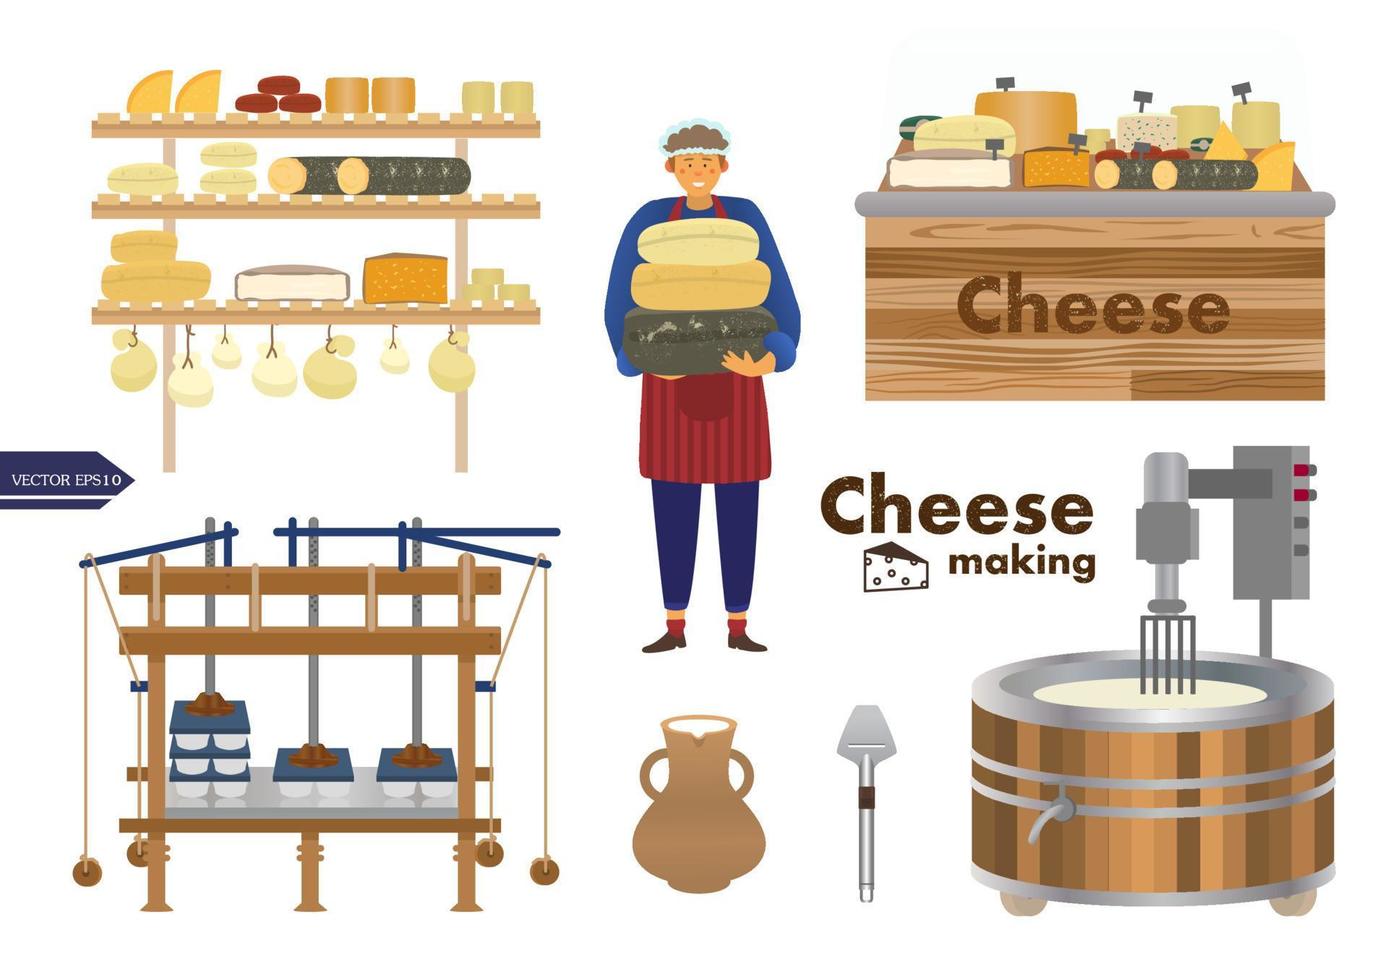 Cheese manufacturing vector set. Dairy production equipment, cheese maker, logo, cheese shop, jug of milk, heat press machine, pasteurizer, knife. Small business. Flat cartoon style.